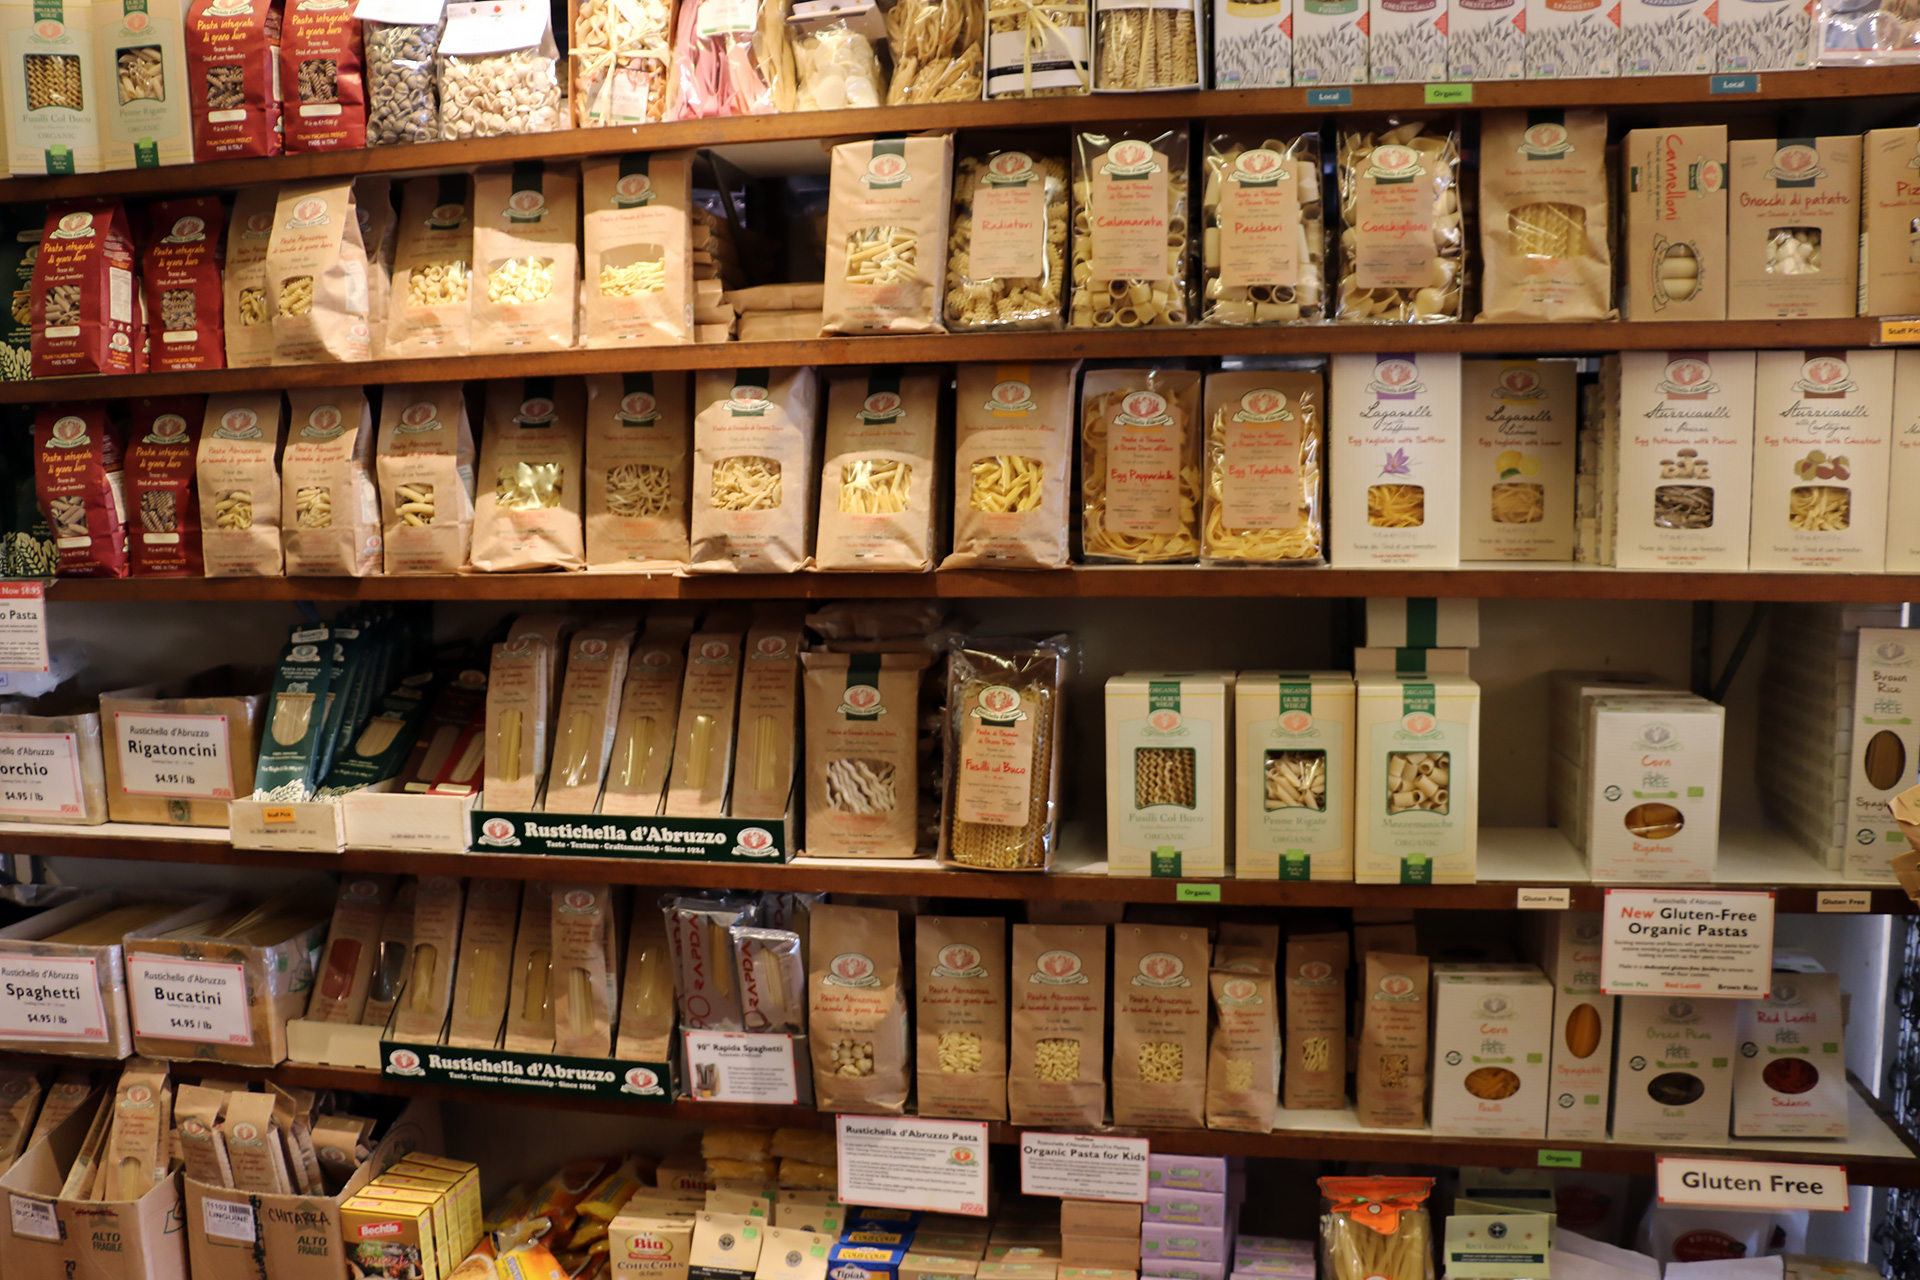 A veritable wall of the highest quality dried pastas from Italy and the U.S.